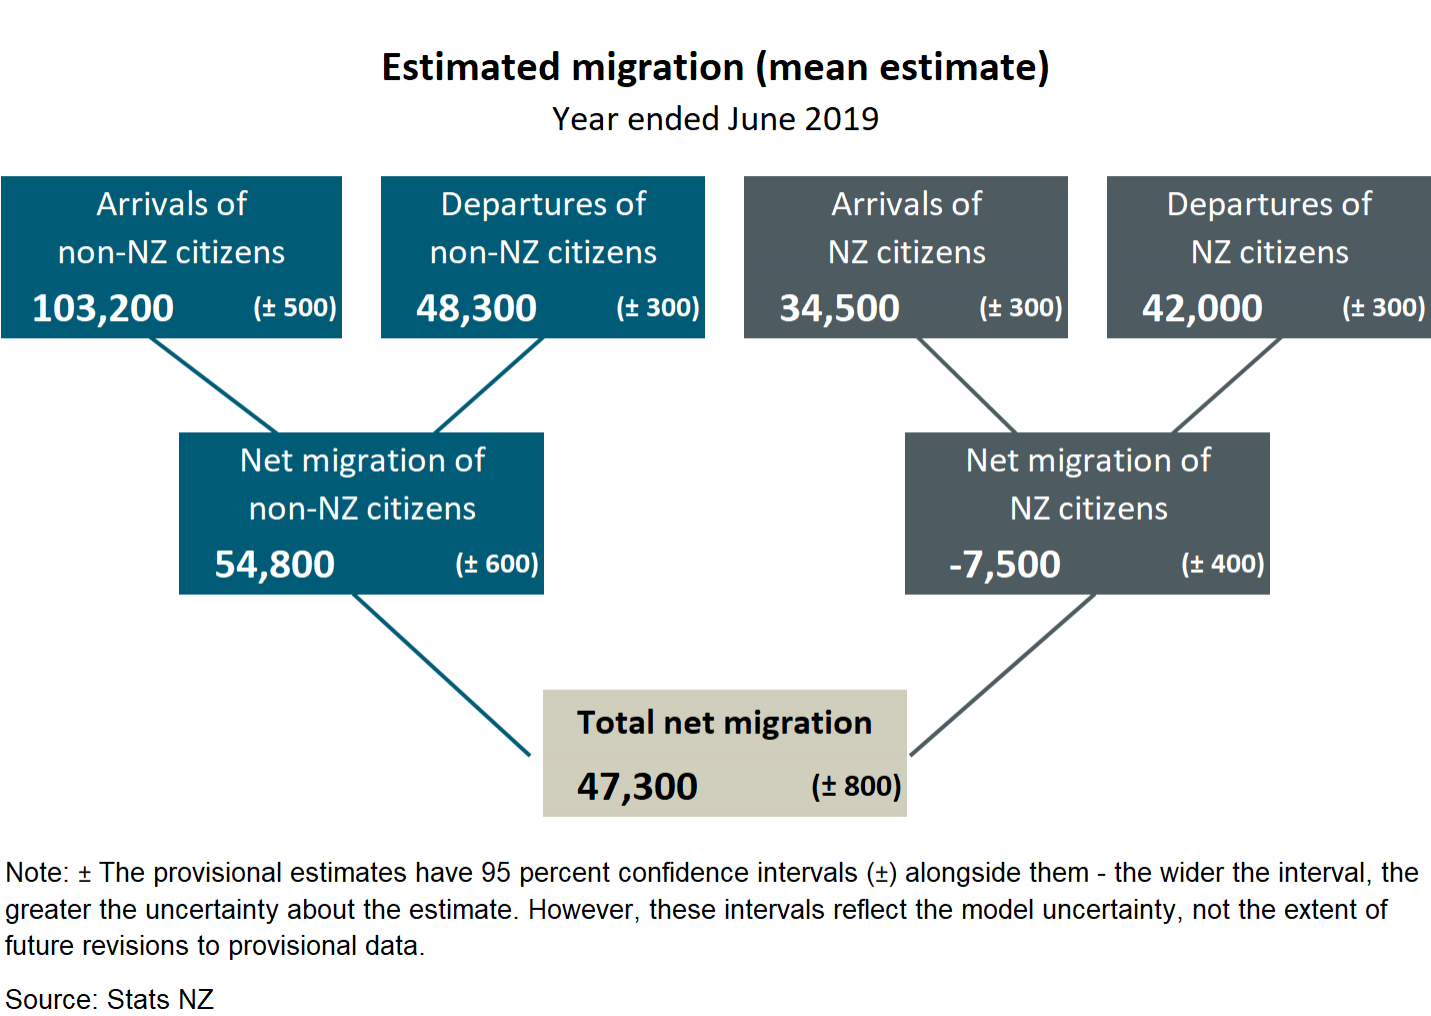 Diagram showing estimated migration (mean estimate), year ended June 2019. Text alternative available below diagram.